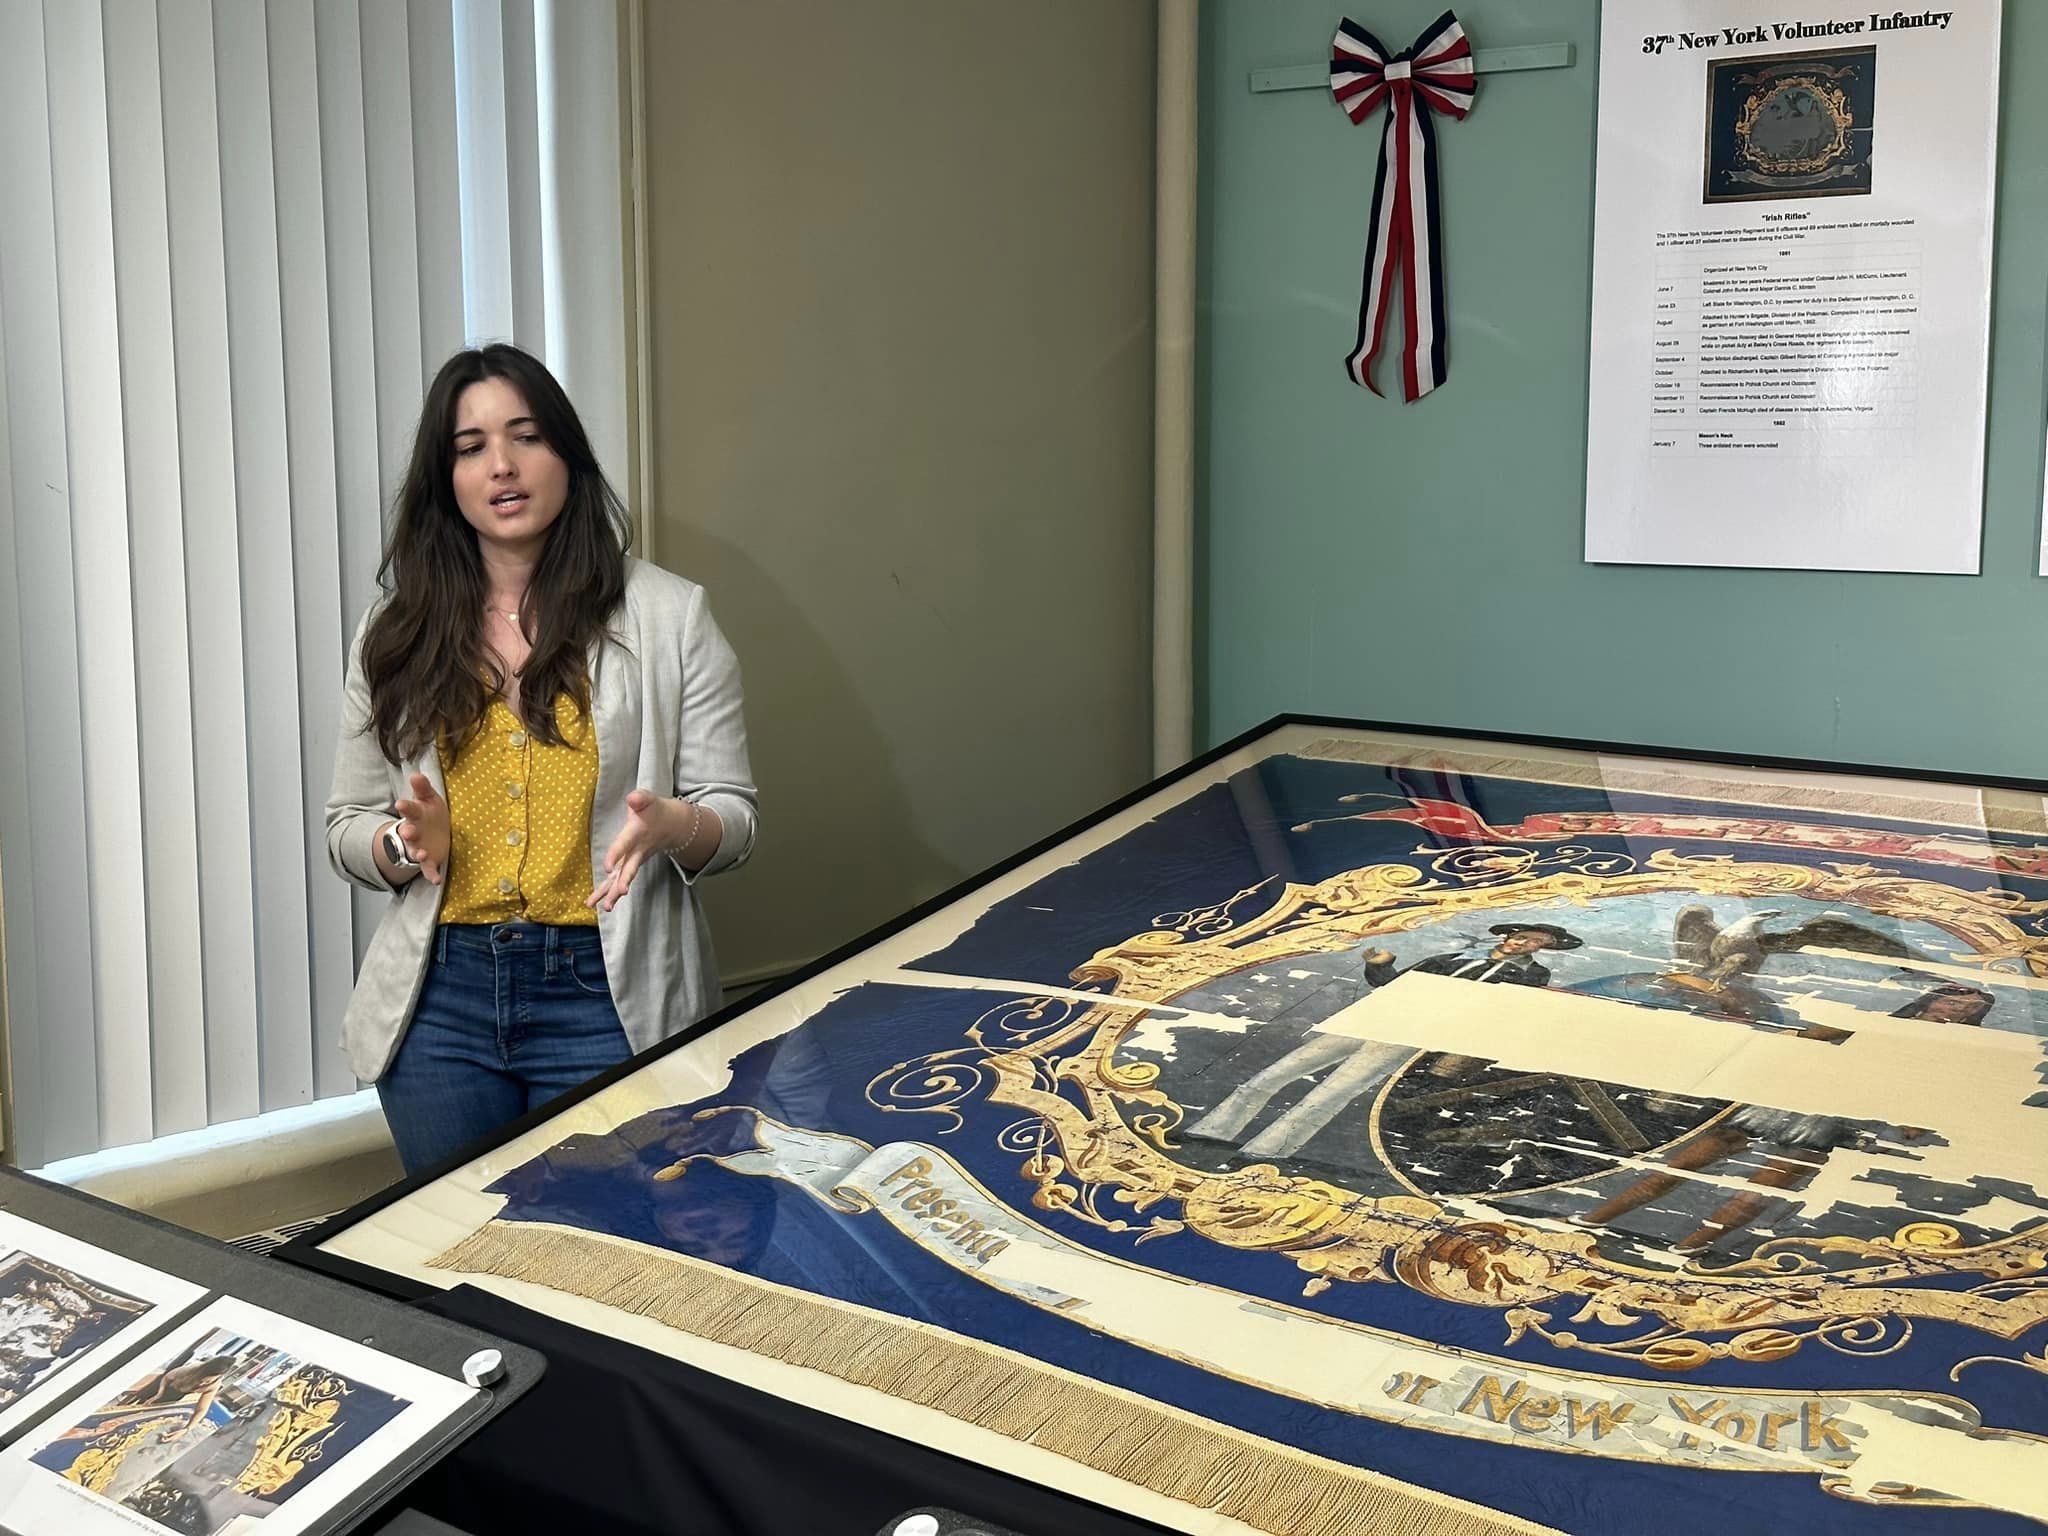 Katya Zinsli, now working at the Smithsonian, speaks next to the 37th NY regimental flag she helped restore.